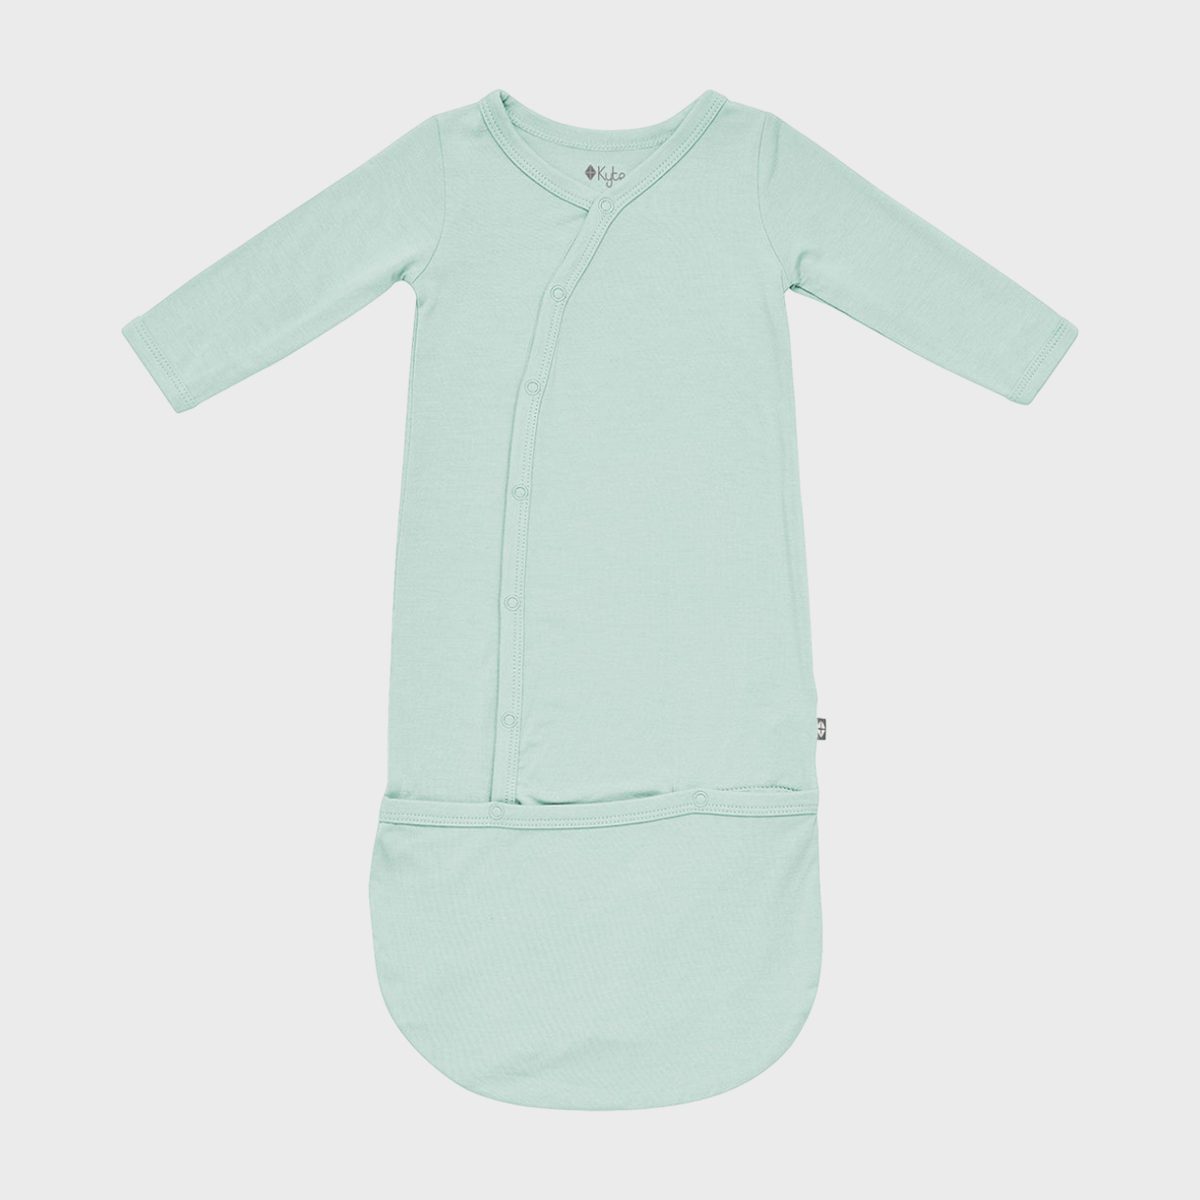 <p>The latest arrival may already have a closet full of adorable outfits, but those first days home are all about ease and comfort. Like everything Kyte Baby makes, this <a href="https://kytebaby.com/products/bundler-in-sage" rel="noopener noreferrer">sleep gown</a> is buttery soft and easy to get on and off. Unlike traditional sleep gowns, this bundler ensures that the baby's feet stay tucked in and toasty.</p> <p>When it's time for a diaper change, parents just have to unsnap the bundle and flip it back for easy access. The smallest sizes have fold-over cuffs to prevent scratches. Pair with a <a href="https://kytebaby.com/products/knotted-cap-in-sage" rel="noopener noreferrer">matching cap</a> for one of the most adorable and useful baby gifts. Not sure what size to buy? Here are some <a href="https://www.rd.com/article/top-tips-for-buying-baby-clothes/" rel="noopener noreferrer">top tips for buying baby clothes</a>.</p> <p class="listicle-page__cta-button-shop"><a class="shop-btn" href="https://kytebaby.com/products/bundler-in-sage">Shop Now</a></p>